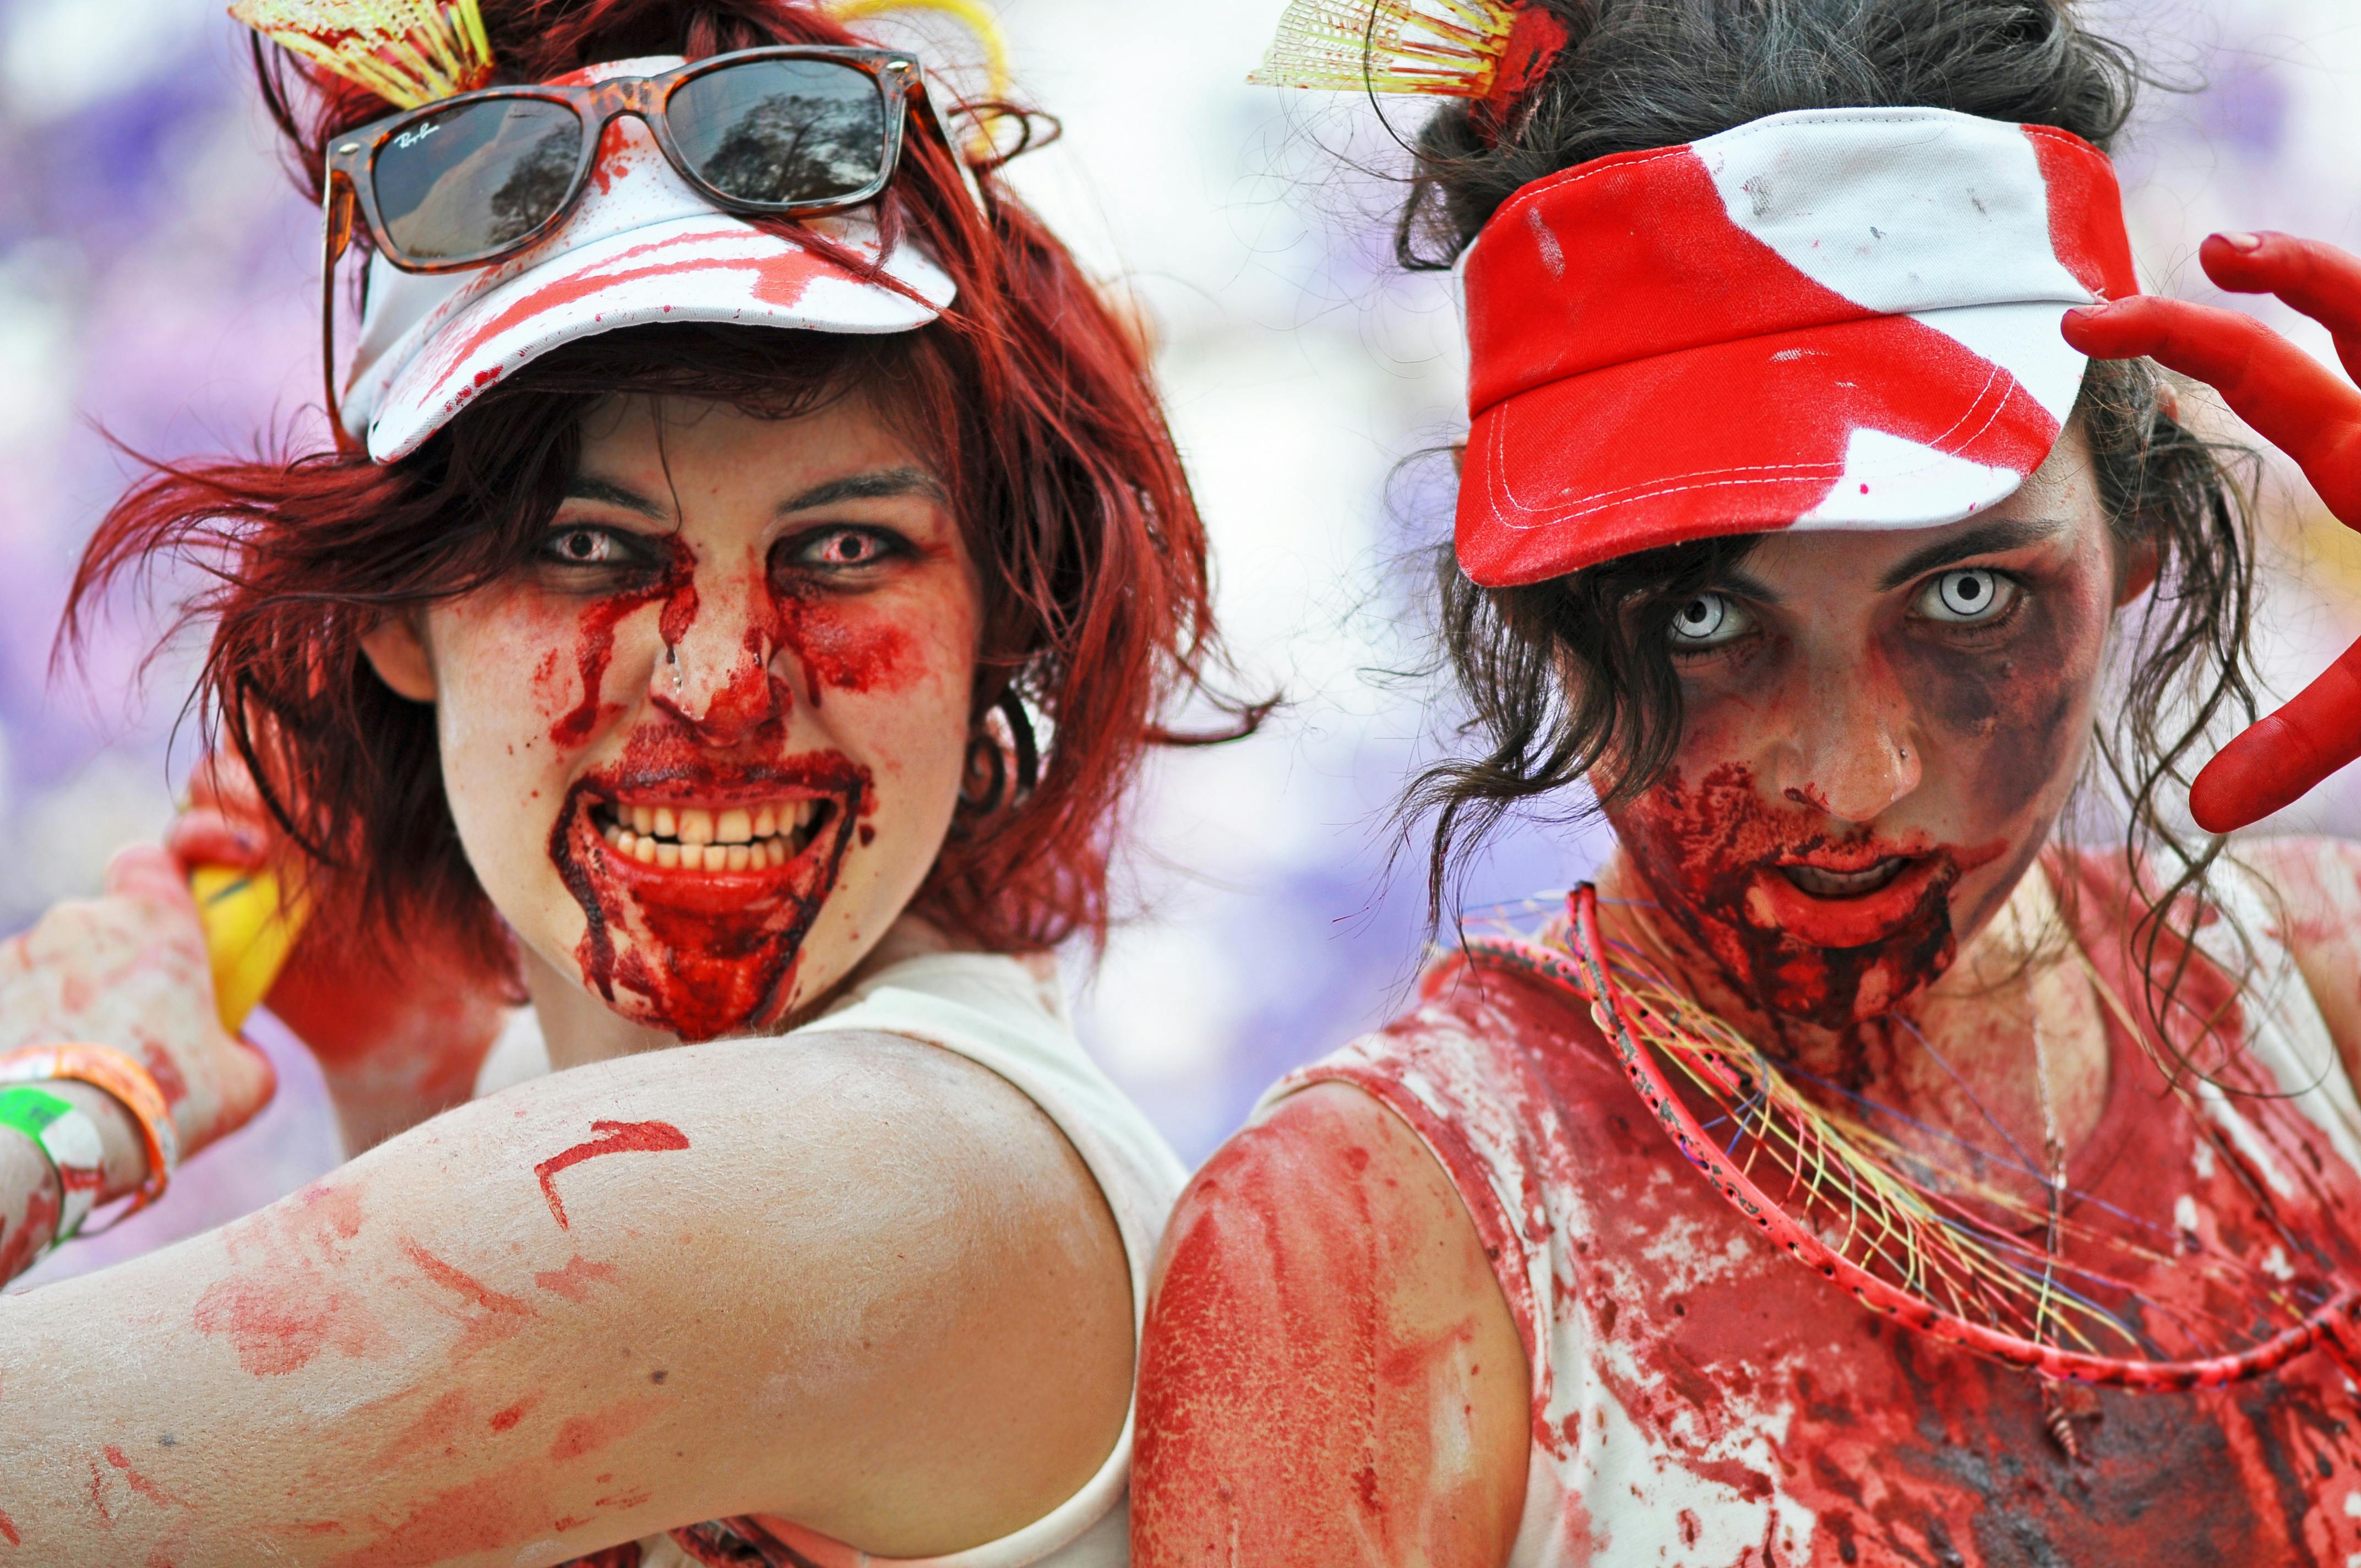 Two women dressed up as zombies, posing for a photo.